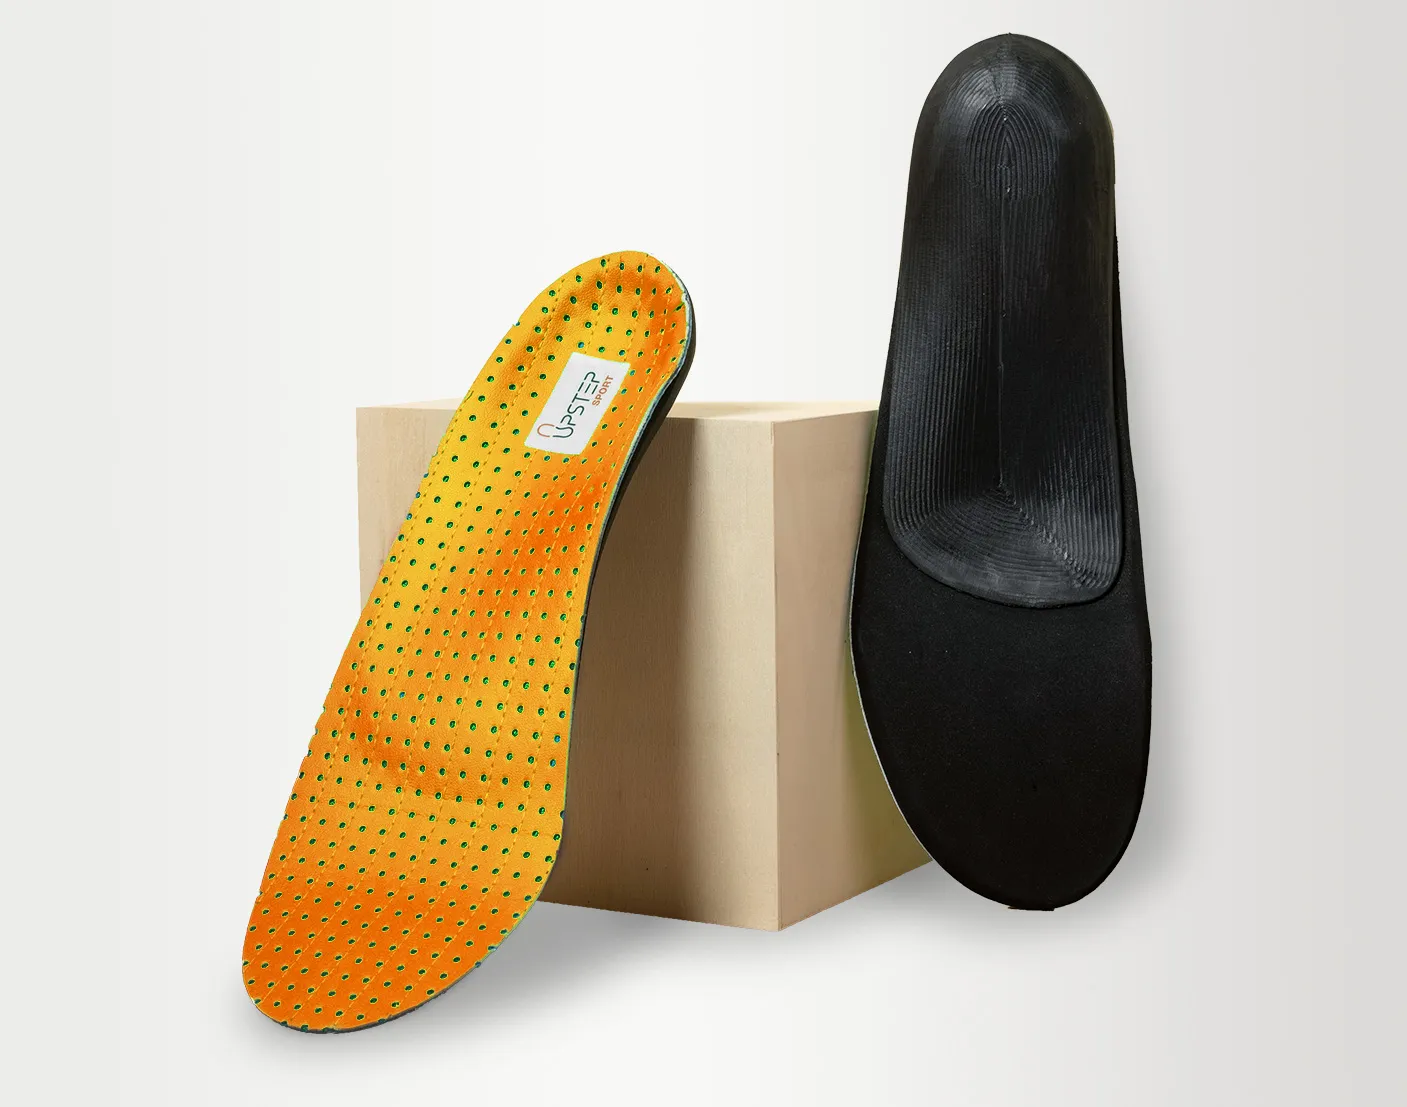 The topside and underside of Upstep custom orthotics for flat feet in orange, presented vertically